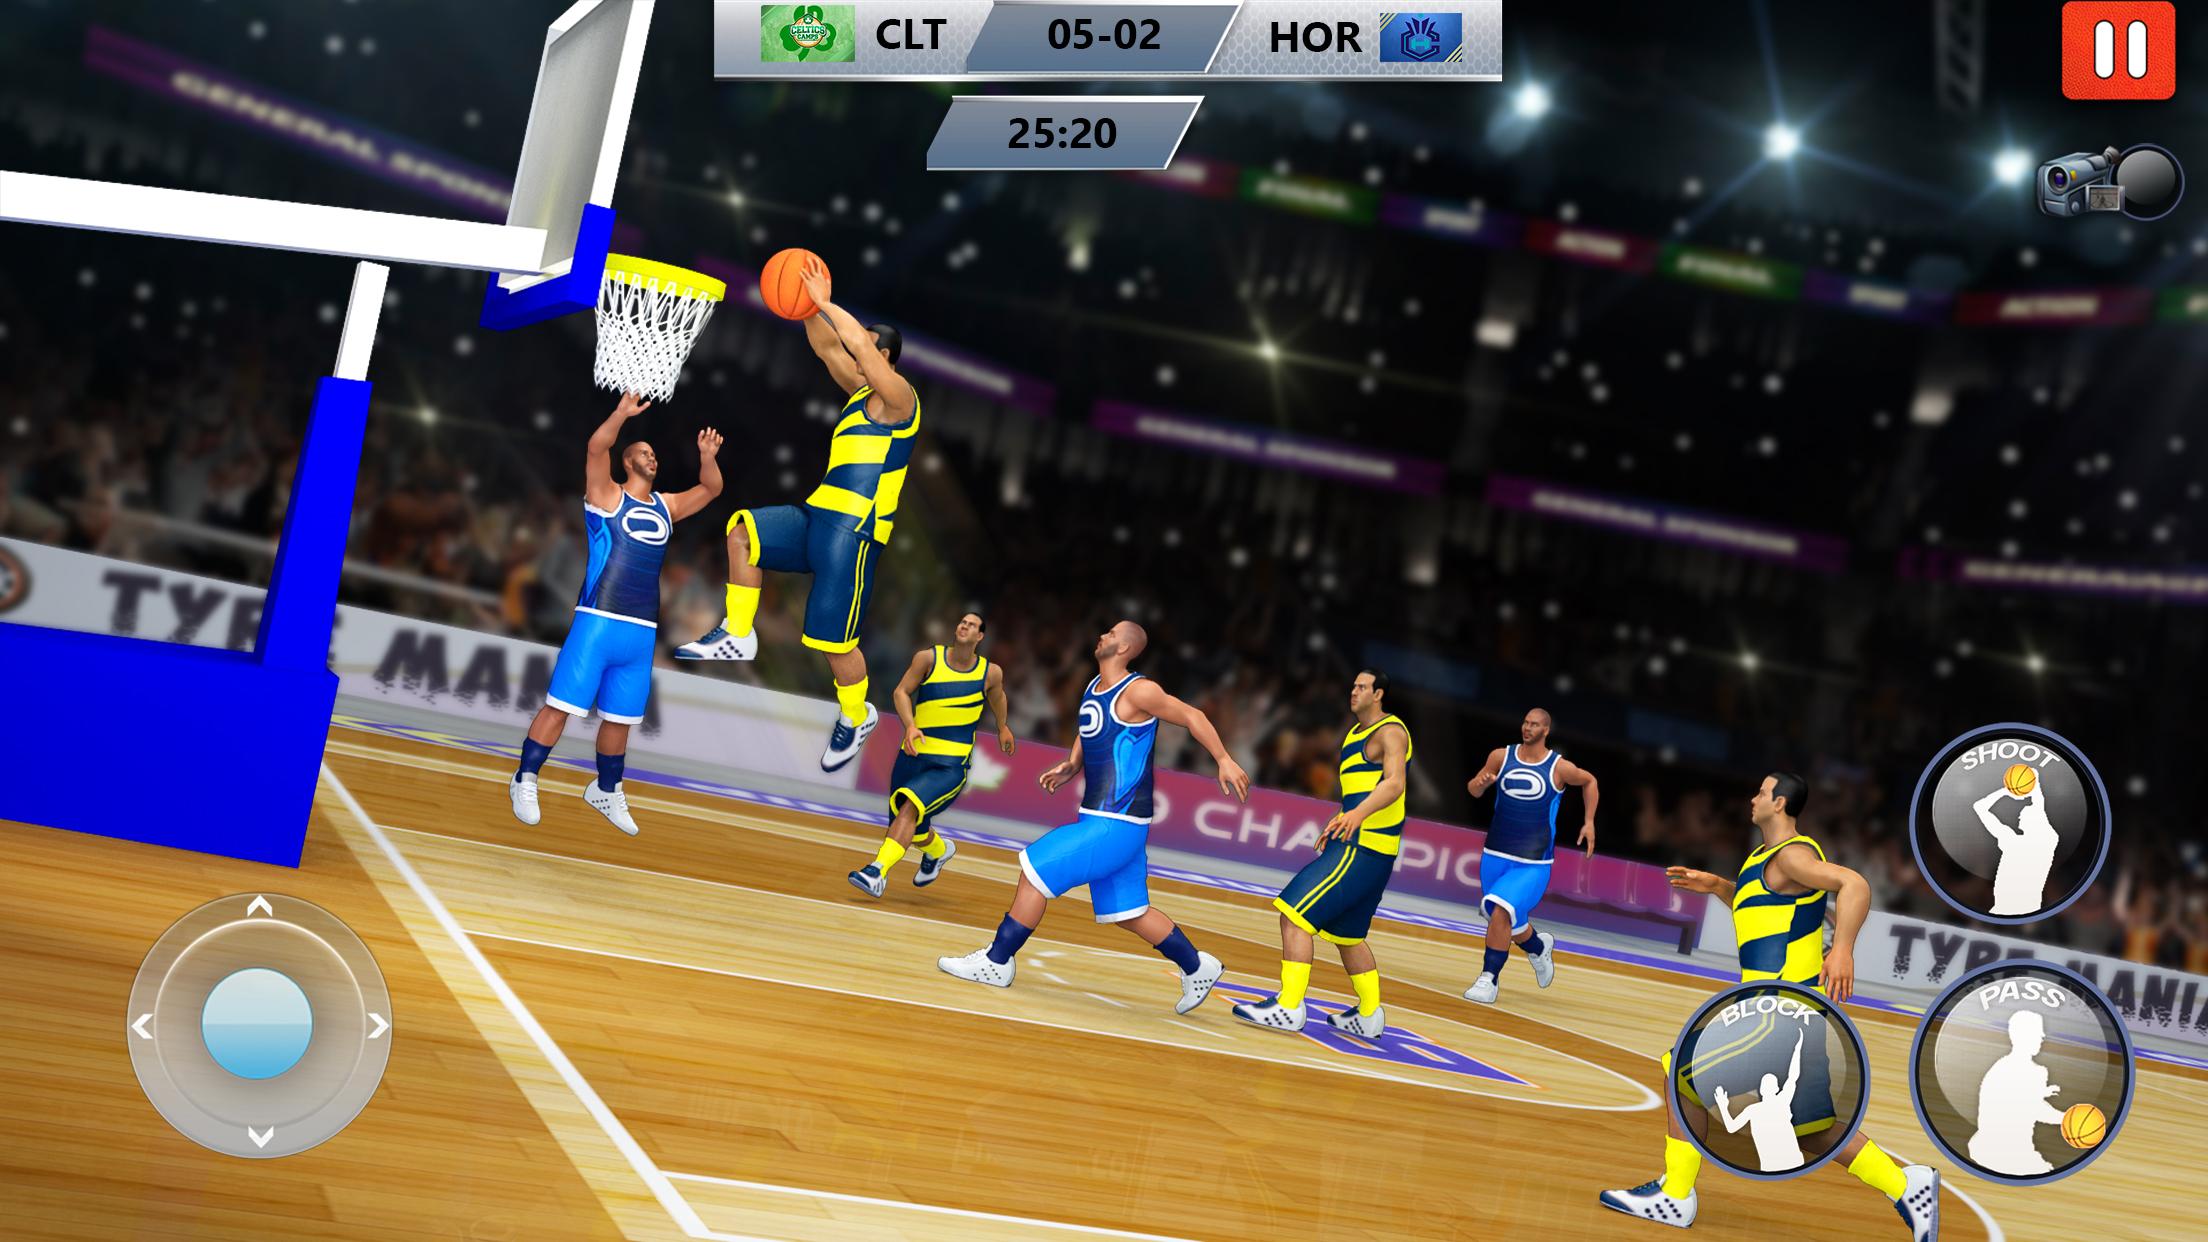 BASKETBALL STARS 🏀⛹️ - Play for Free Online Now!